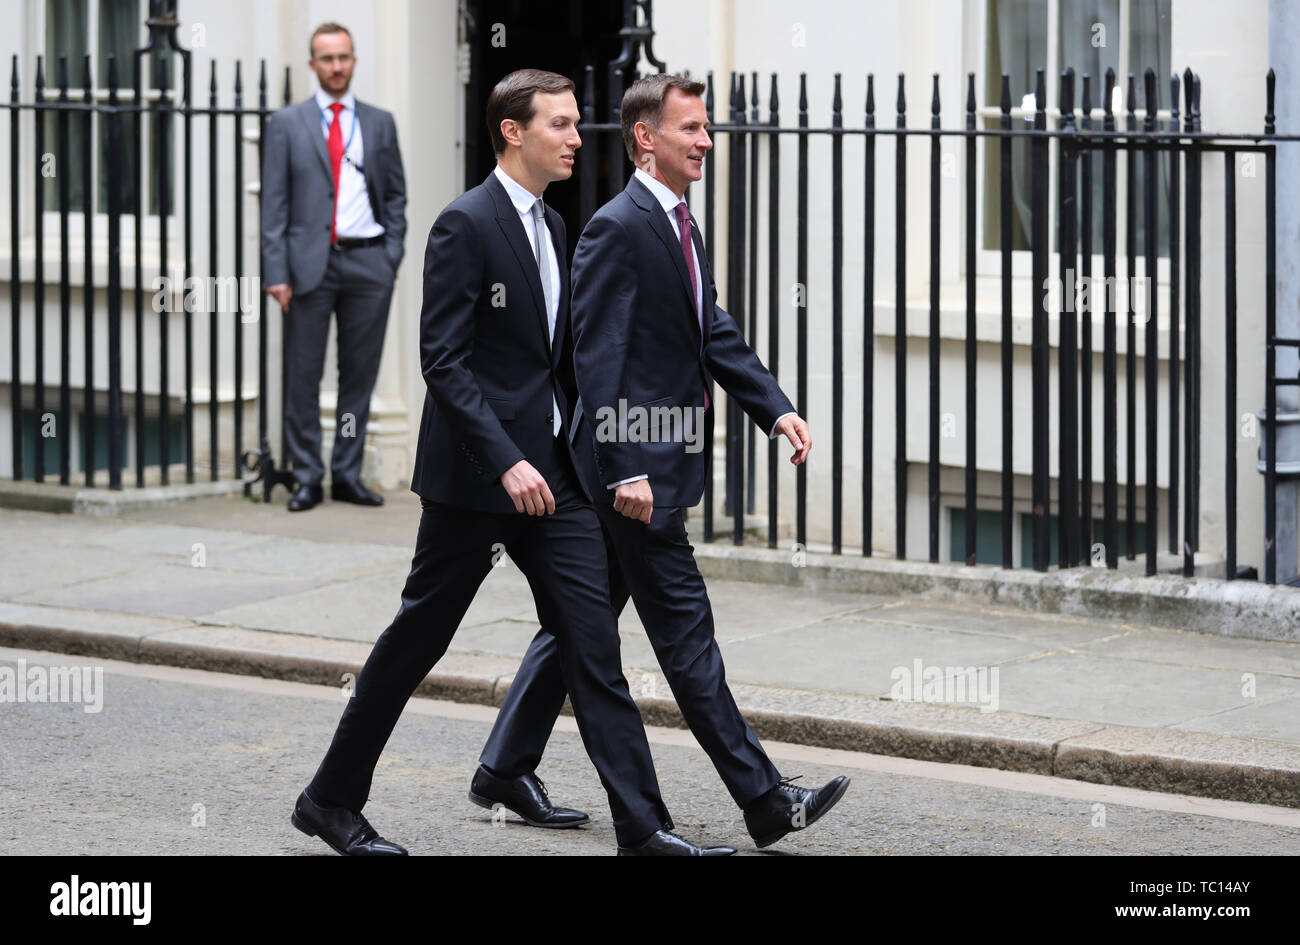 Foreign Secretary Jeremy Hunt arrives in Downing Street, London, ahead of the meeting between Prime Minister Theresa May and US President Trump, on the second day of his state visit to the UK. Stock Photo